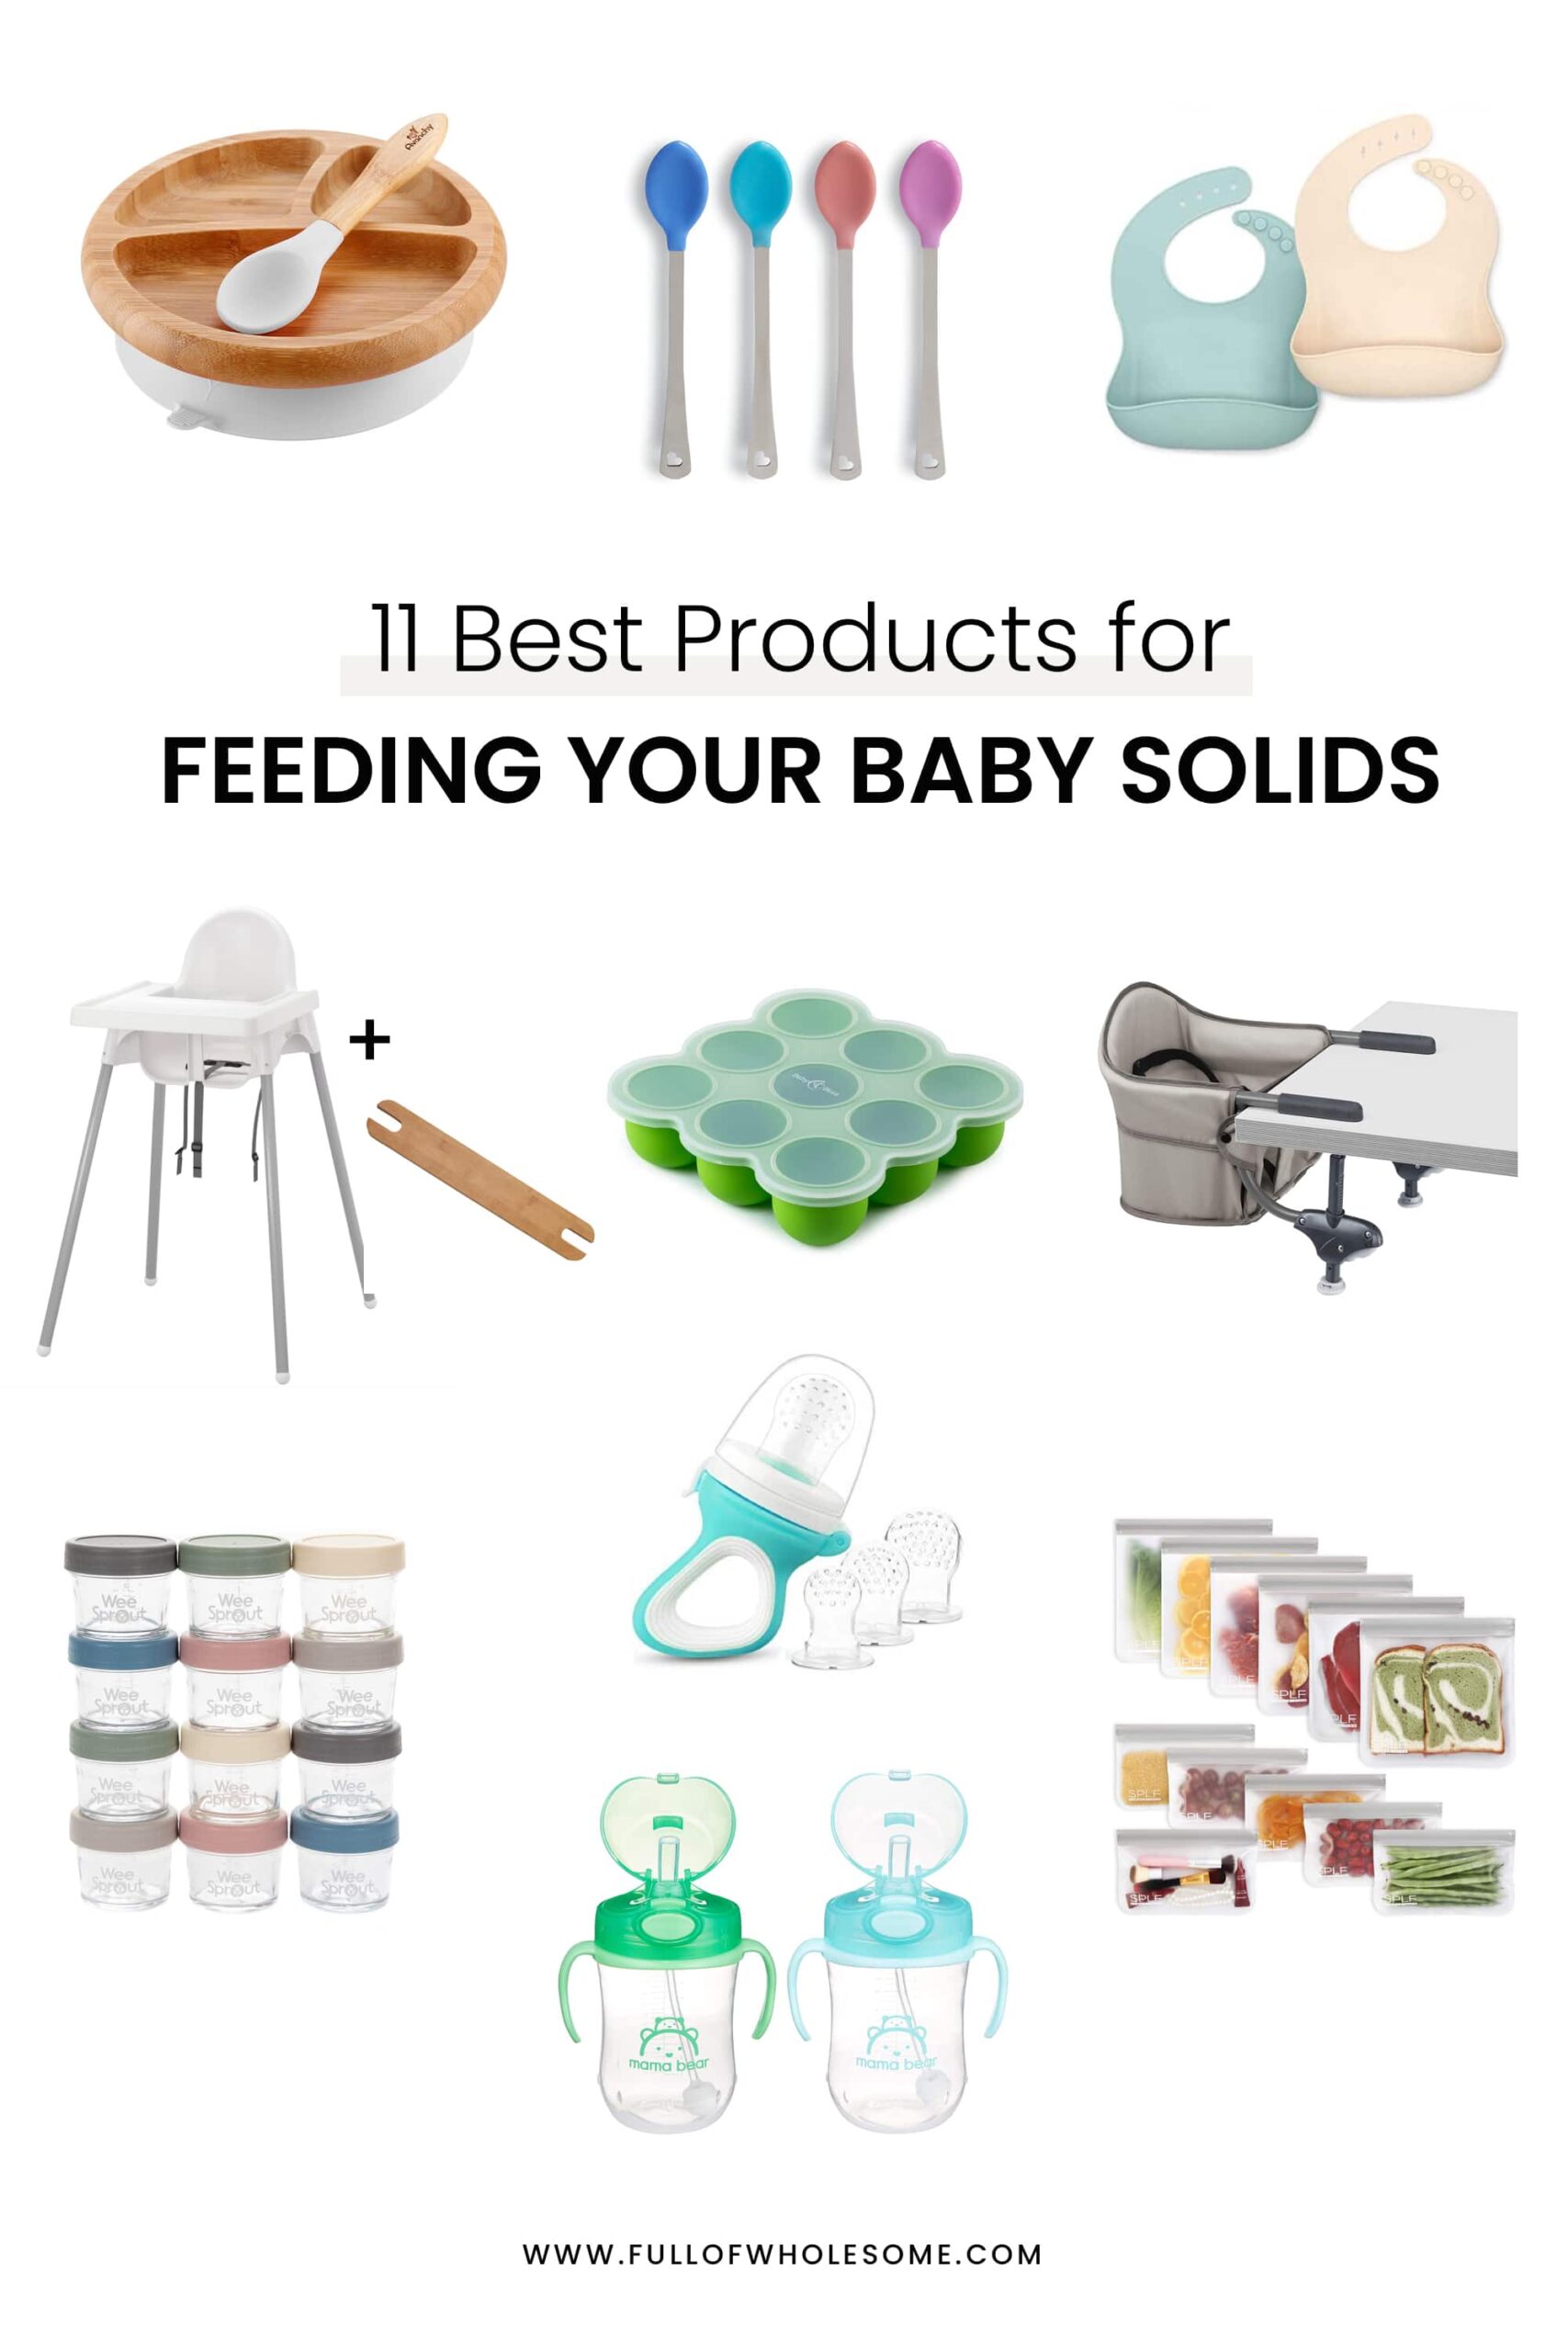 11 best products to feed you baby solids